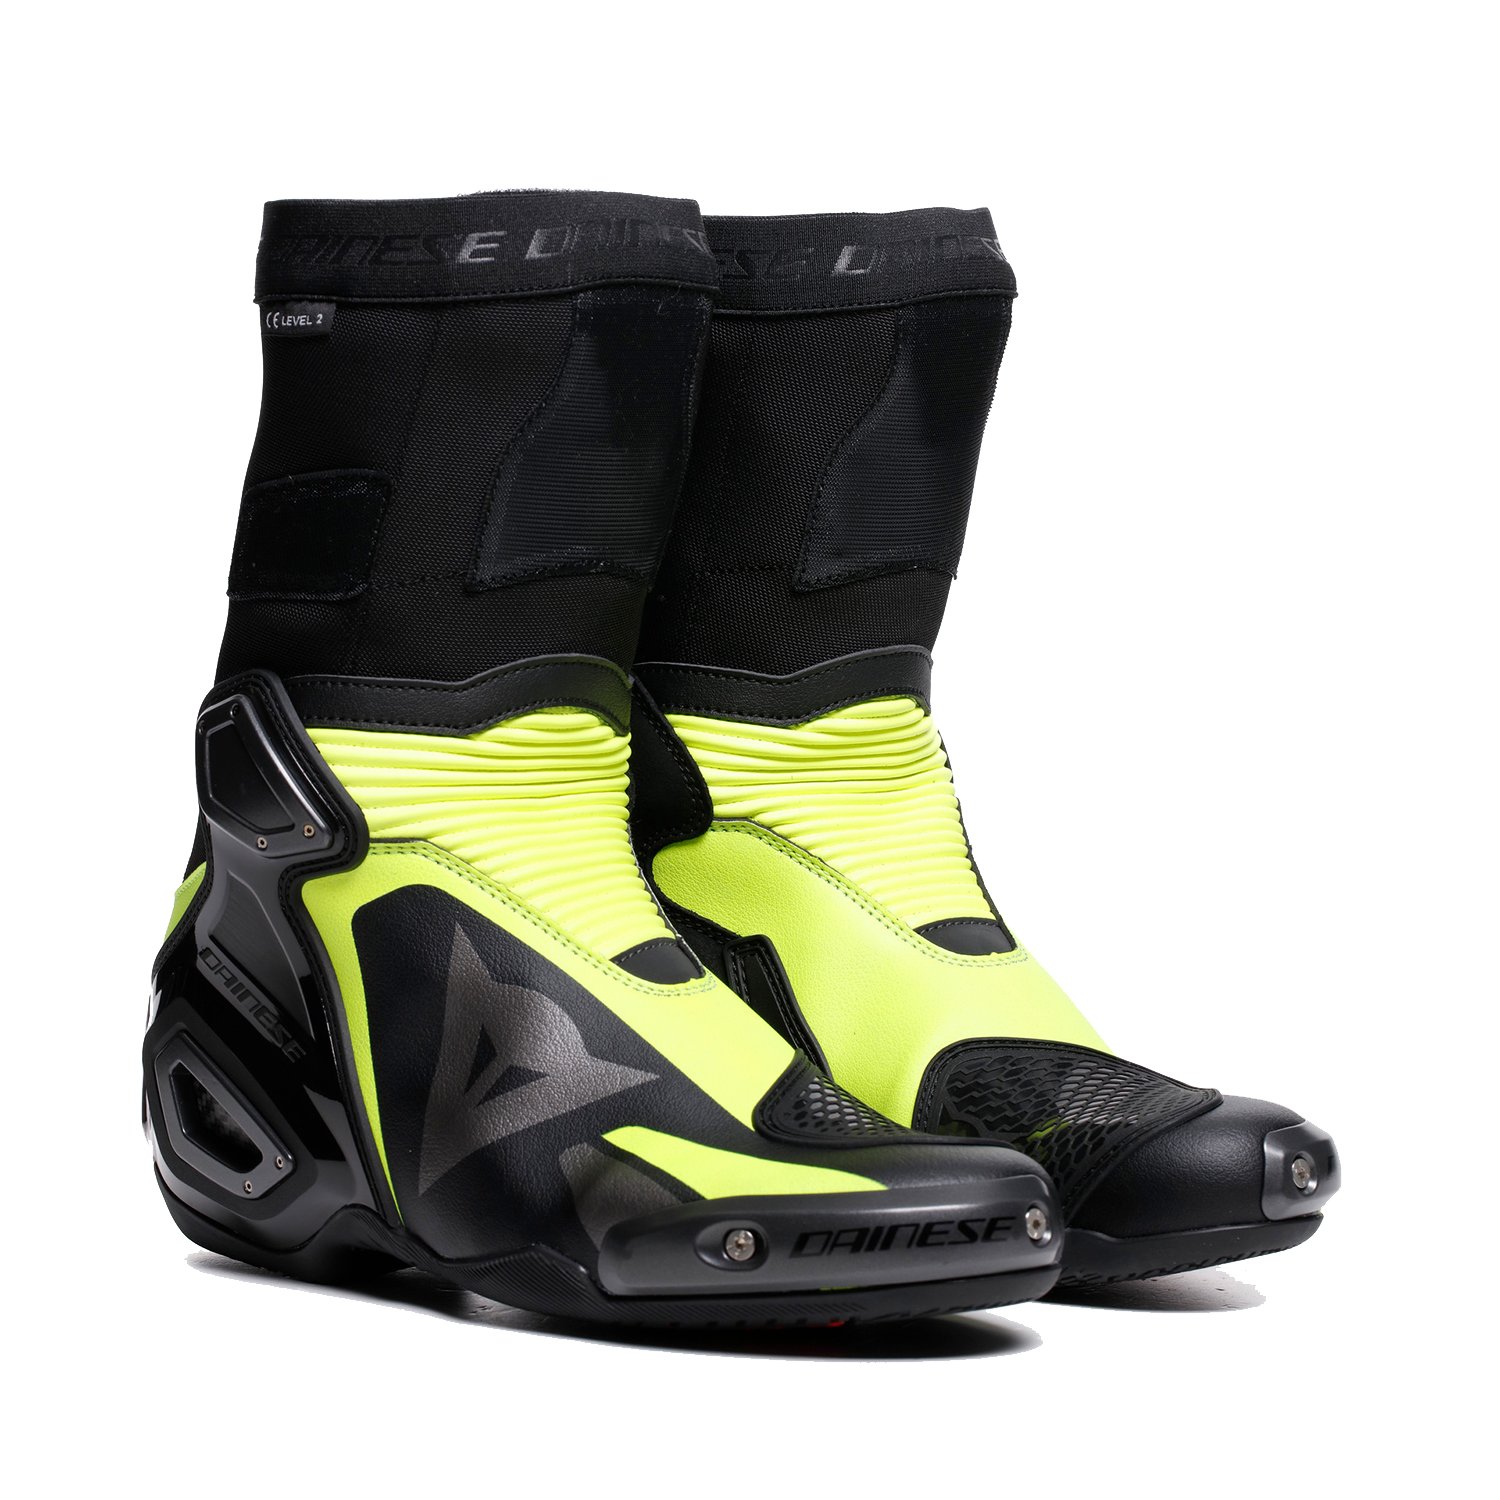 Image of Dainese Axial 2 Boots Black Yellow Fluo Size 46 ID 8051019739513